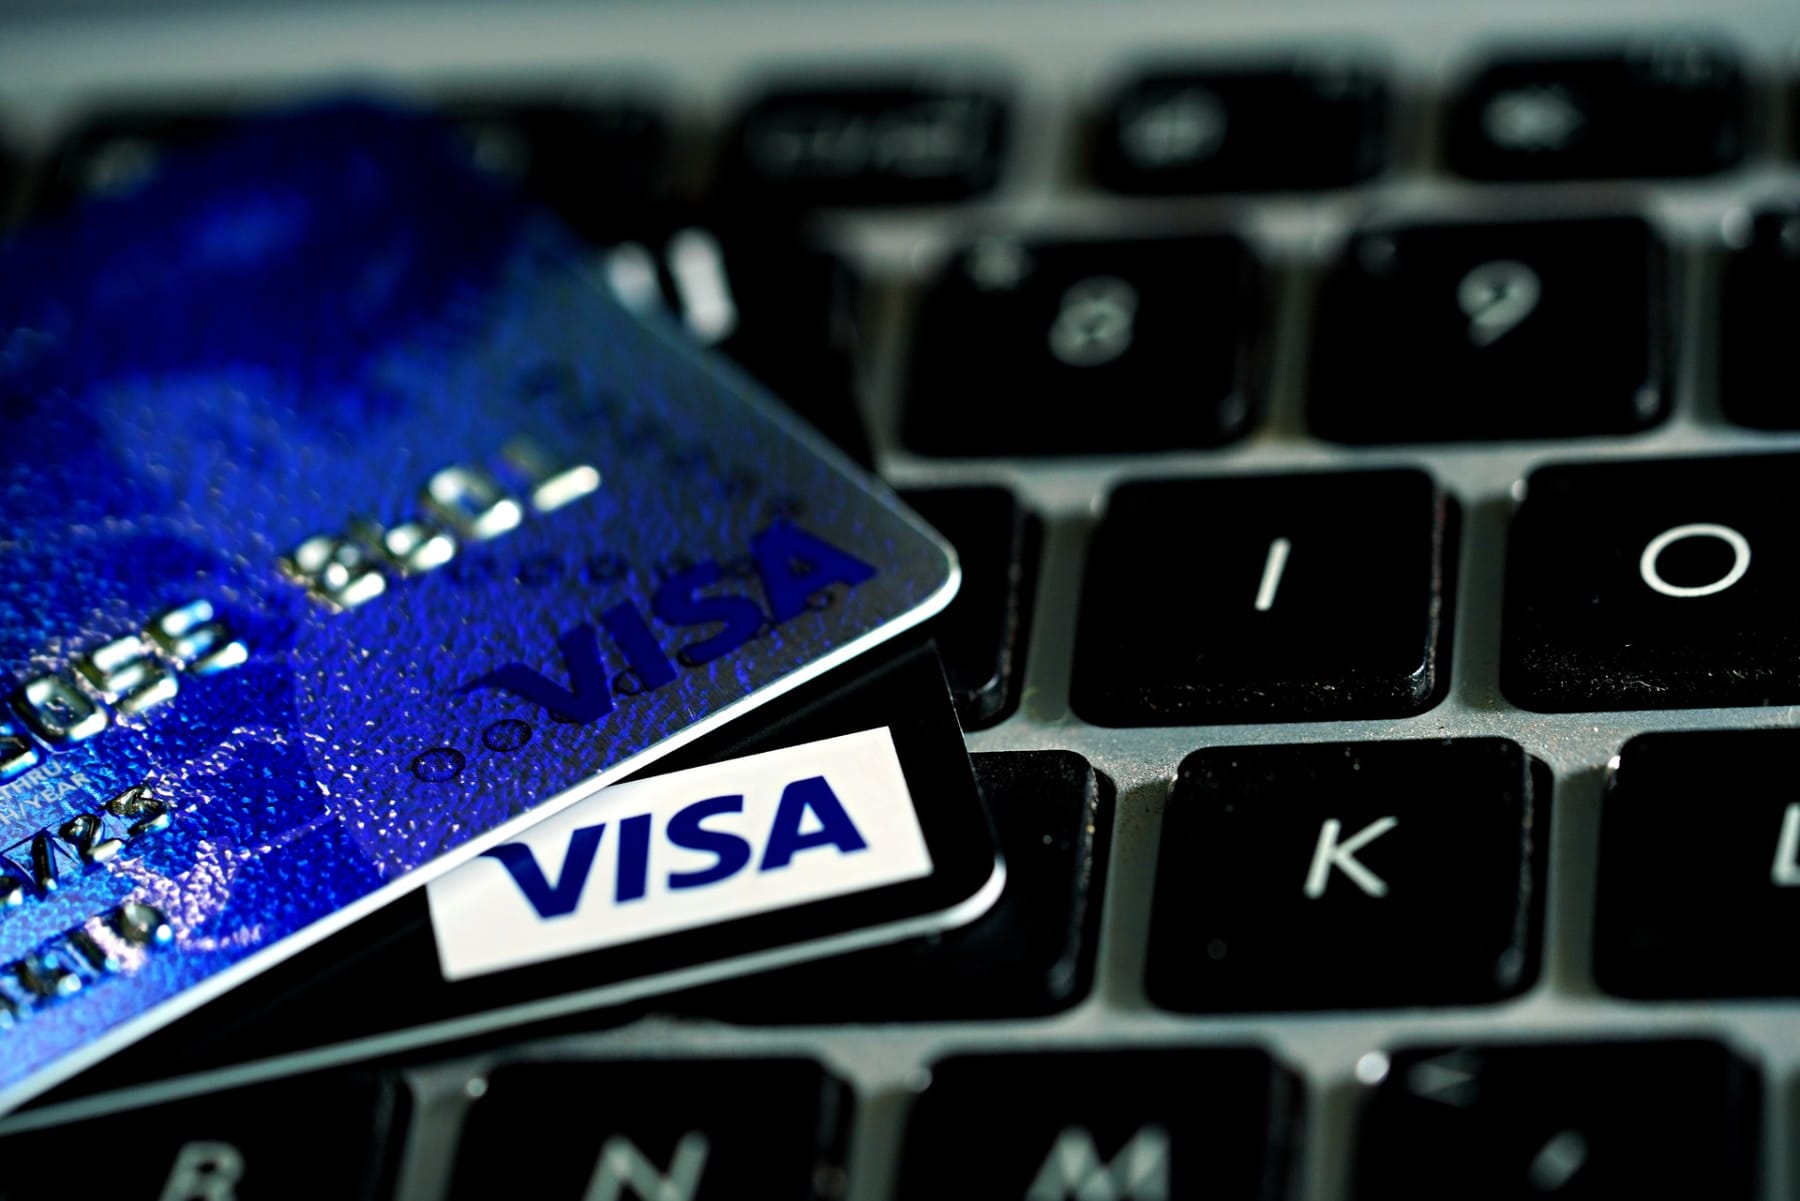 A Visa credit card resting on a computer keyboard for online shopping